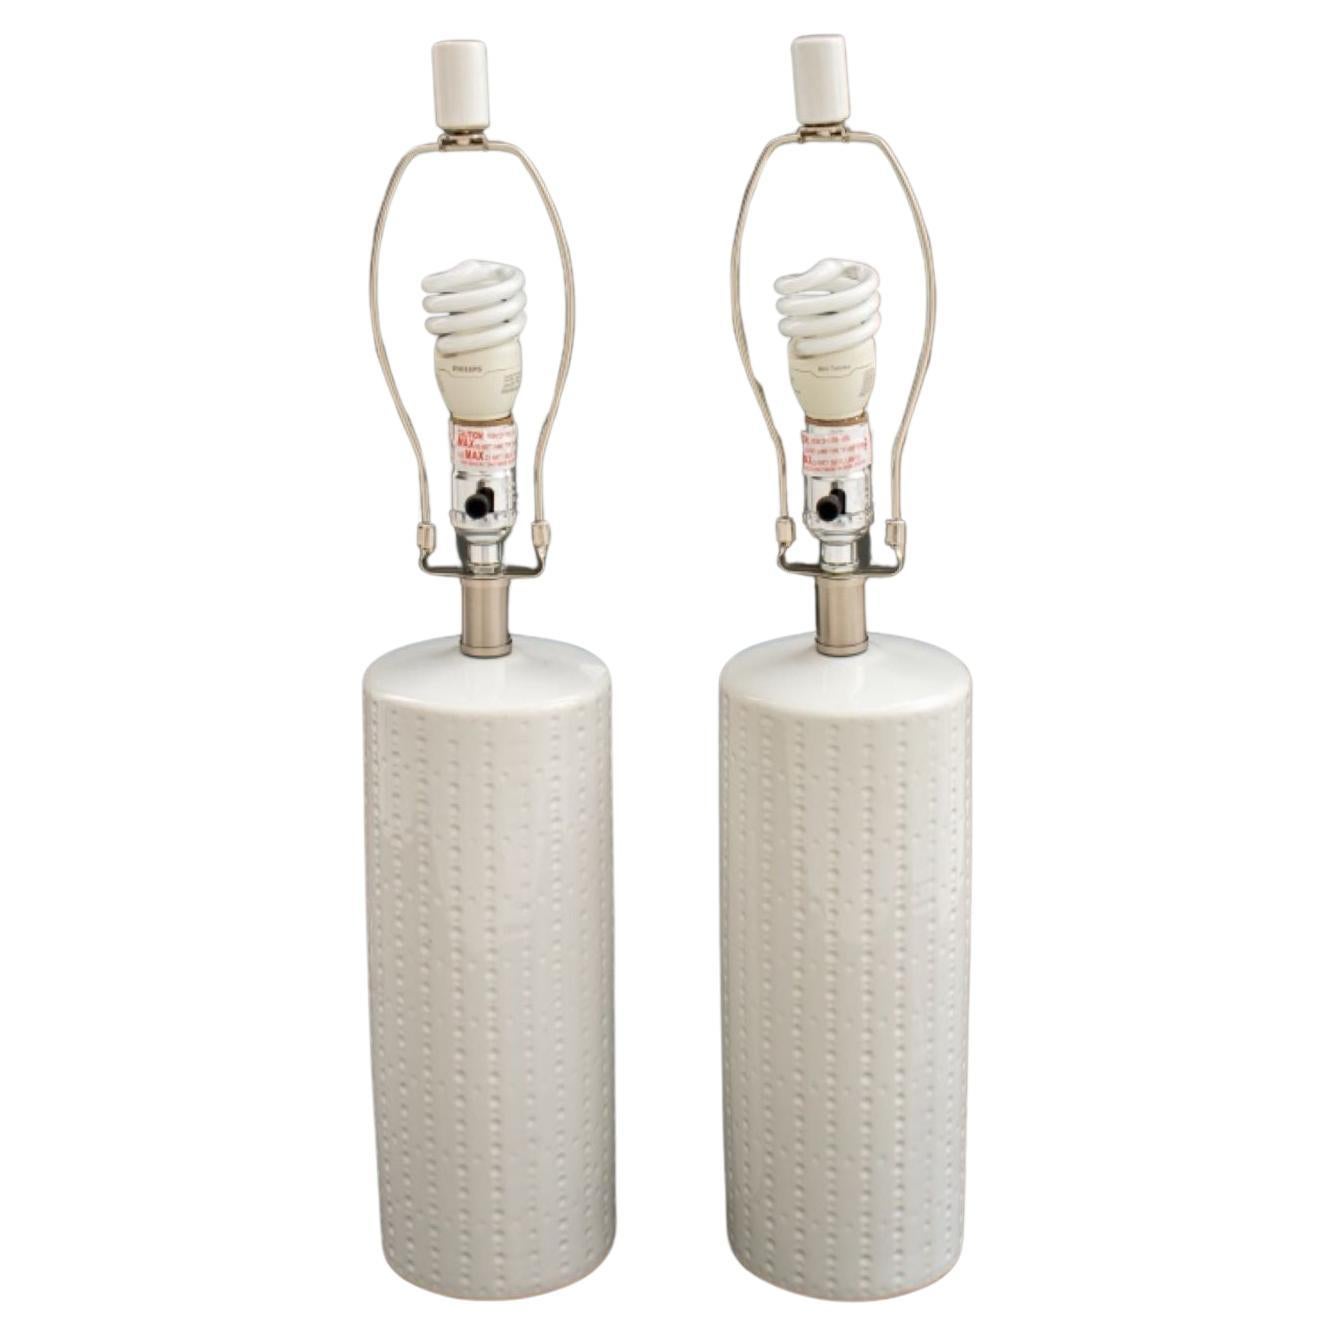 Mod 1970s Style White Ceramic Lamps For Sale